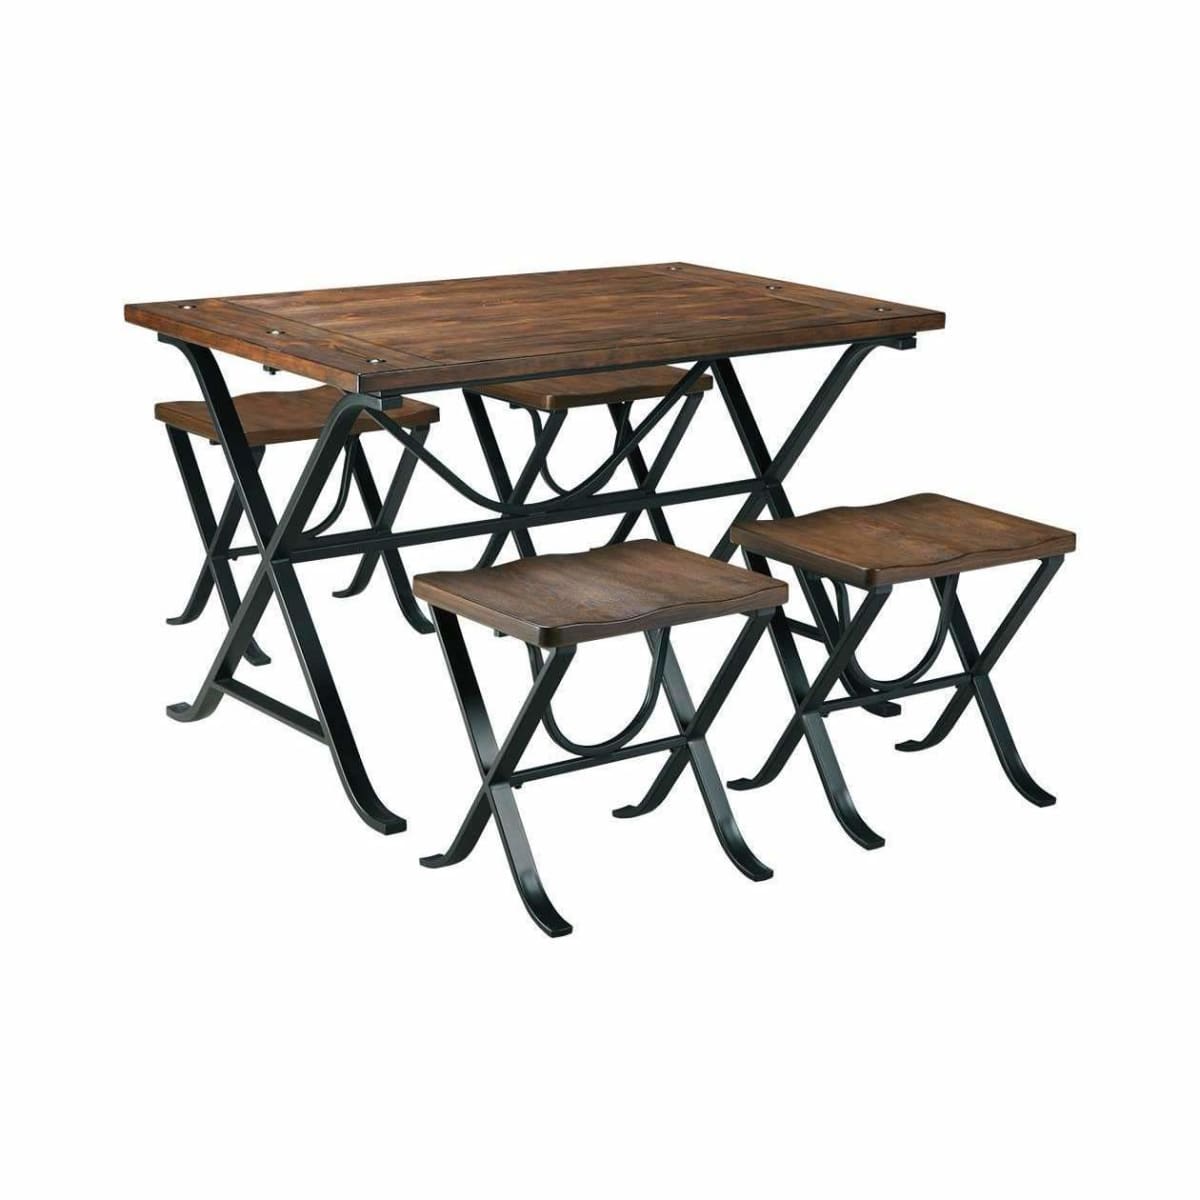 Freimore Dining Room Table and Stools (Set of 5) - DININGCOUNTERHEIGHT